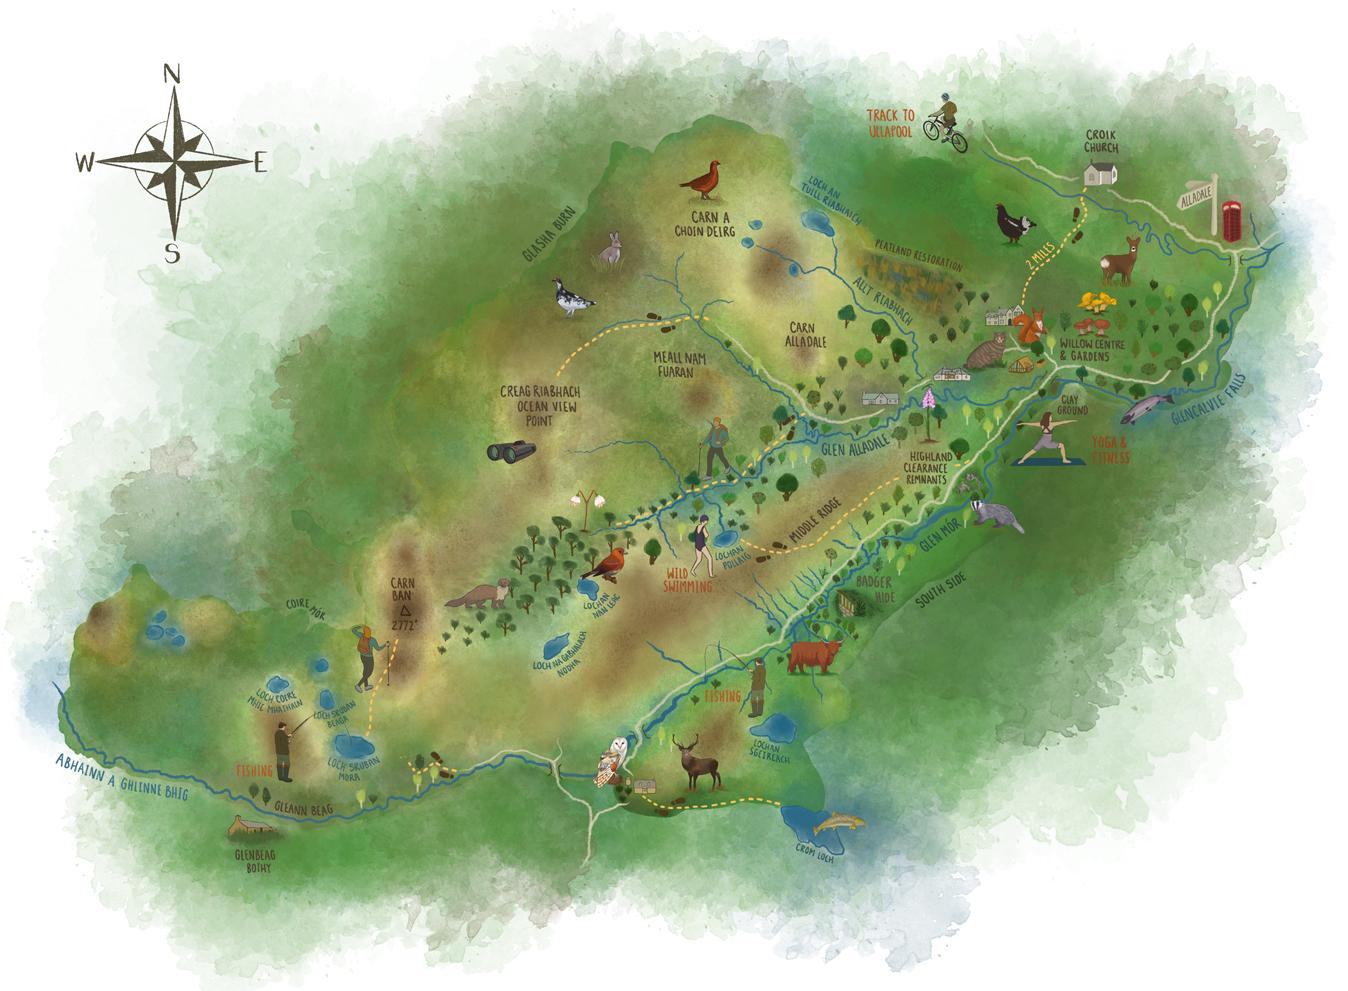 Hand-drawn map of the reserve, revealing the different species, shrubs and activities you can find.